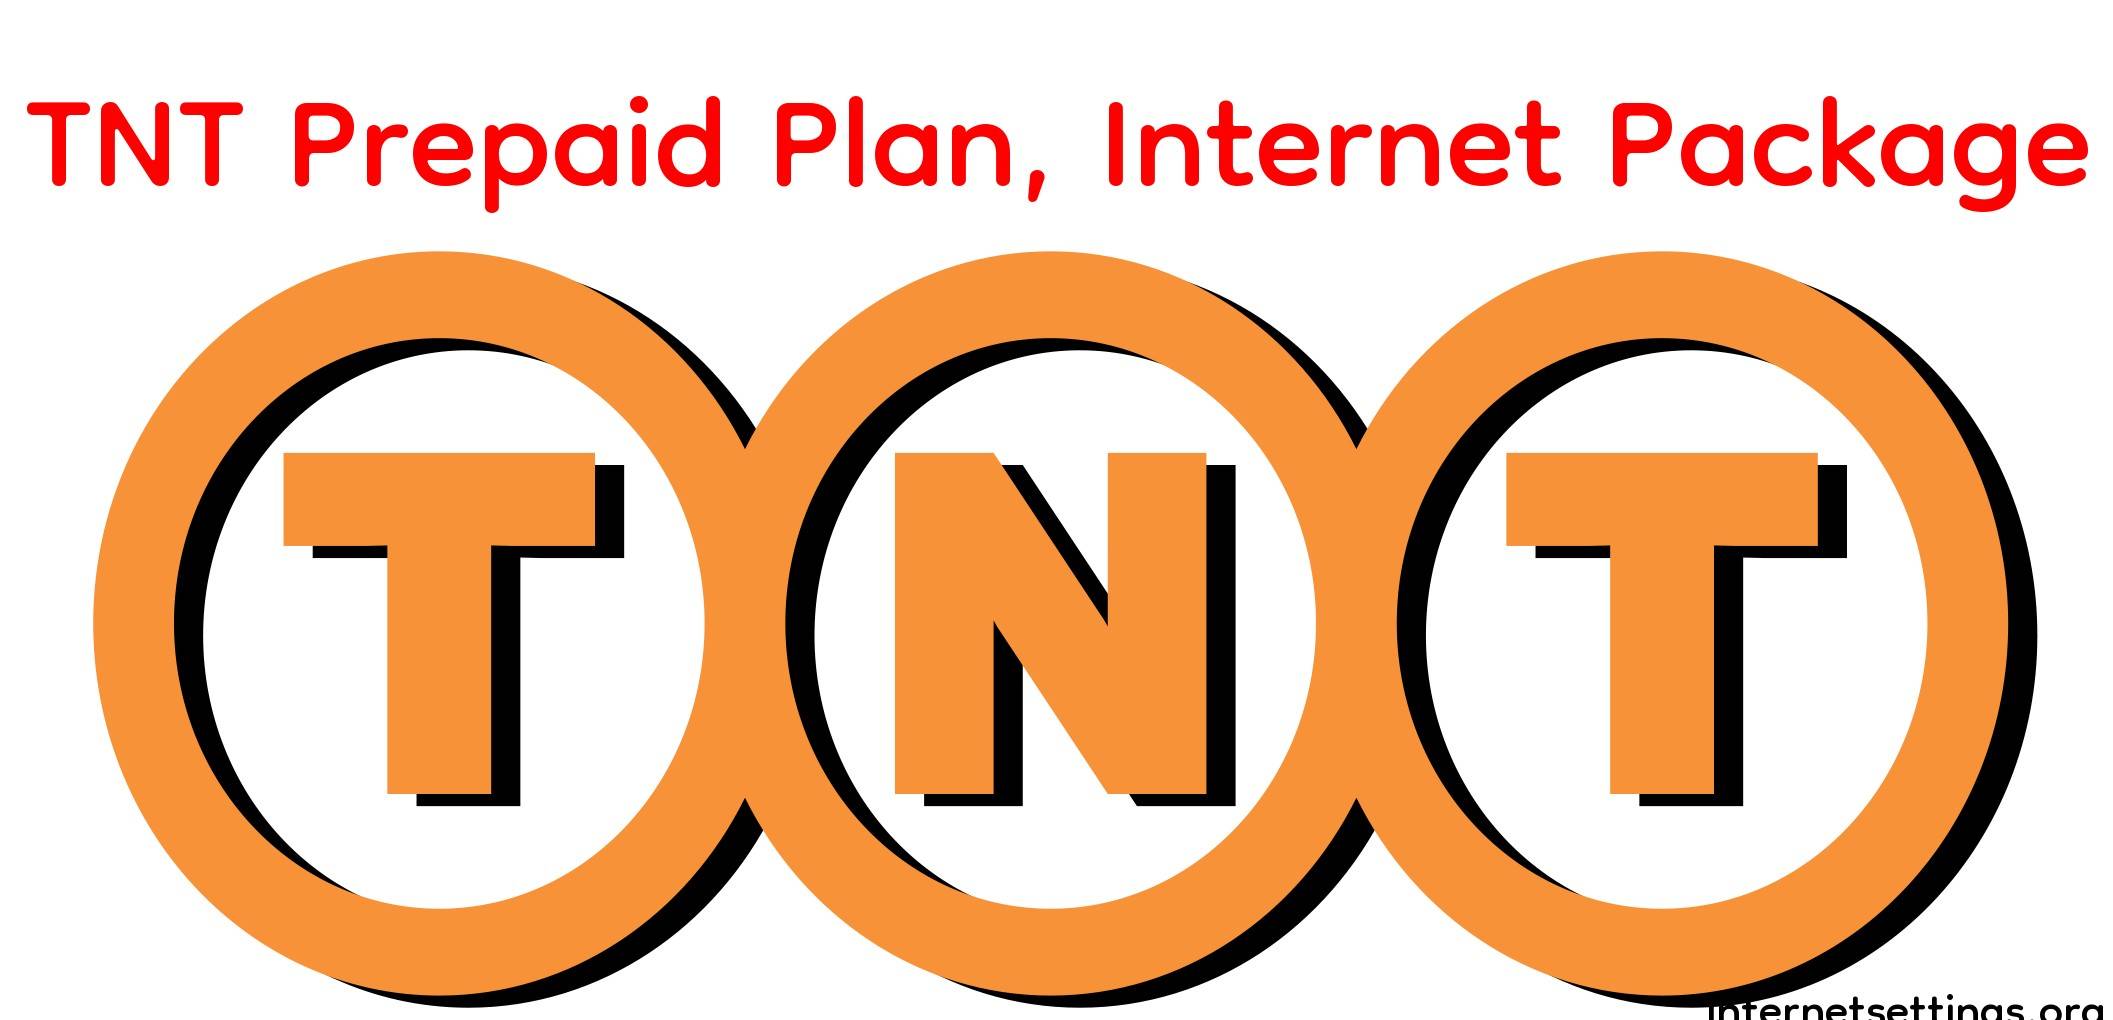 TNT Prepaid Plan and Internet Package